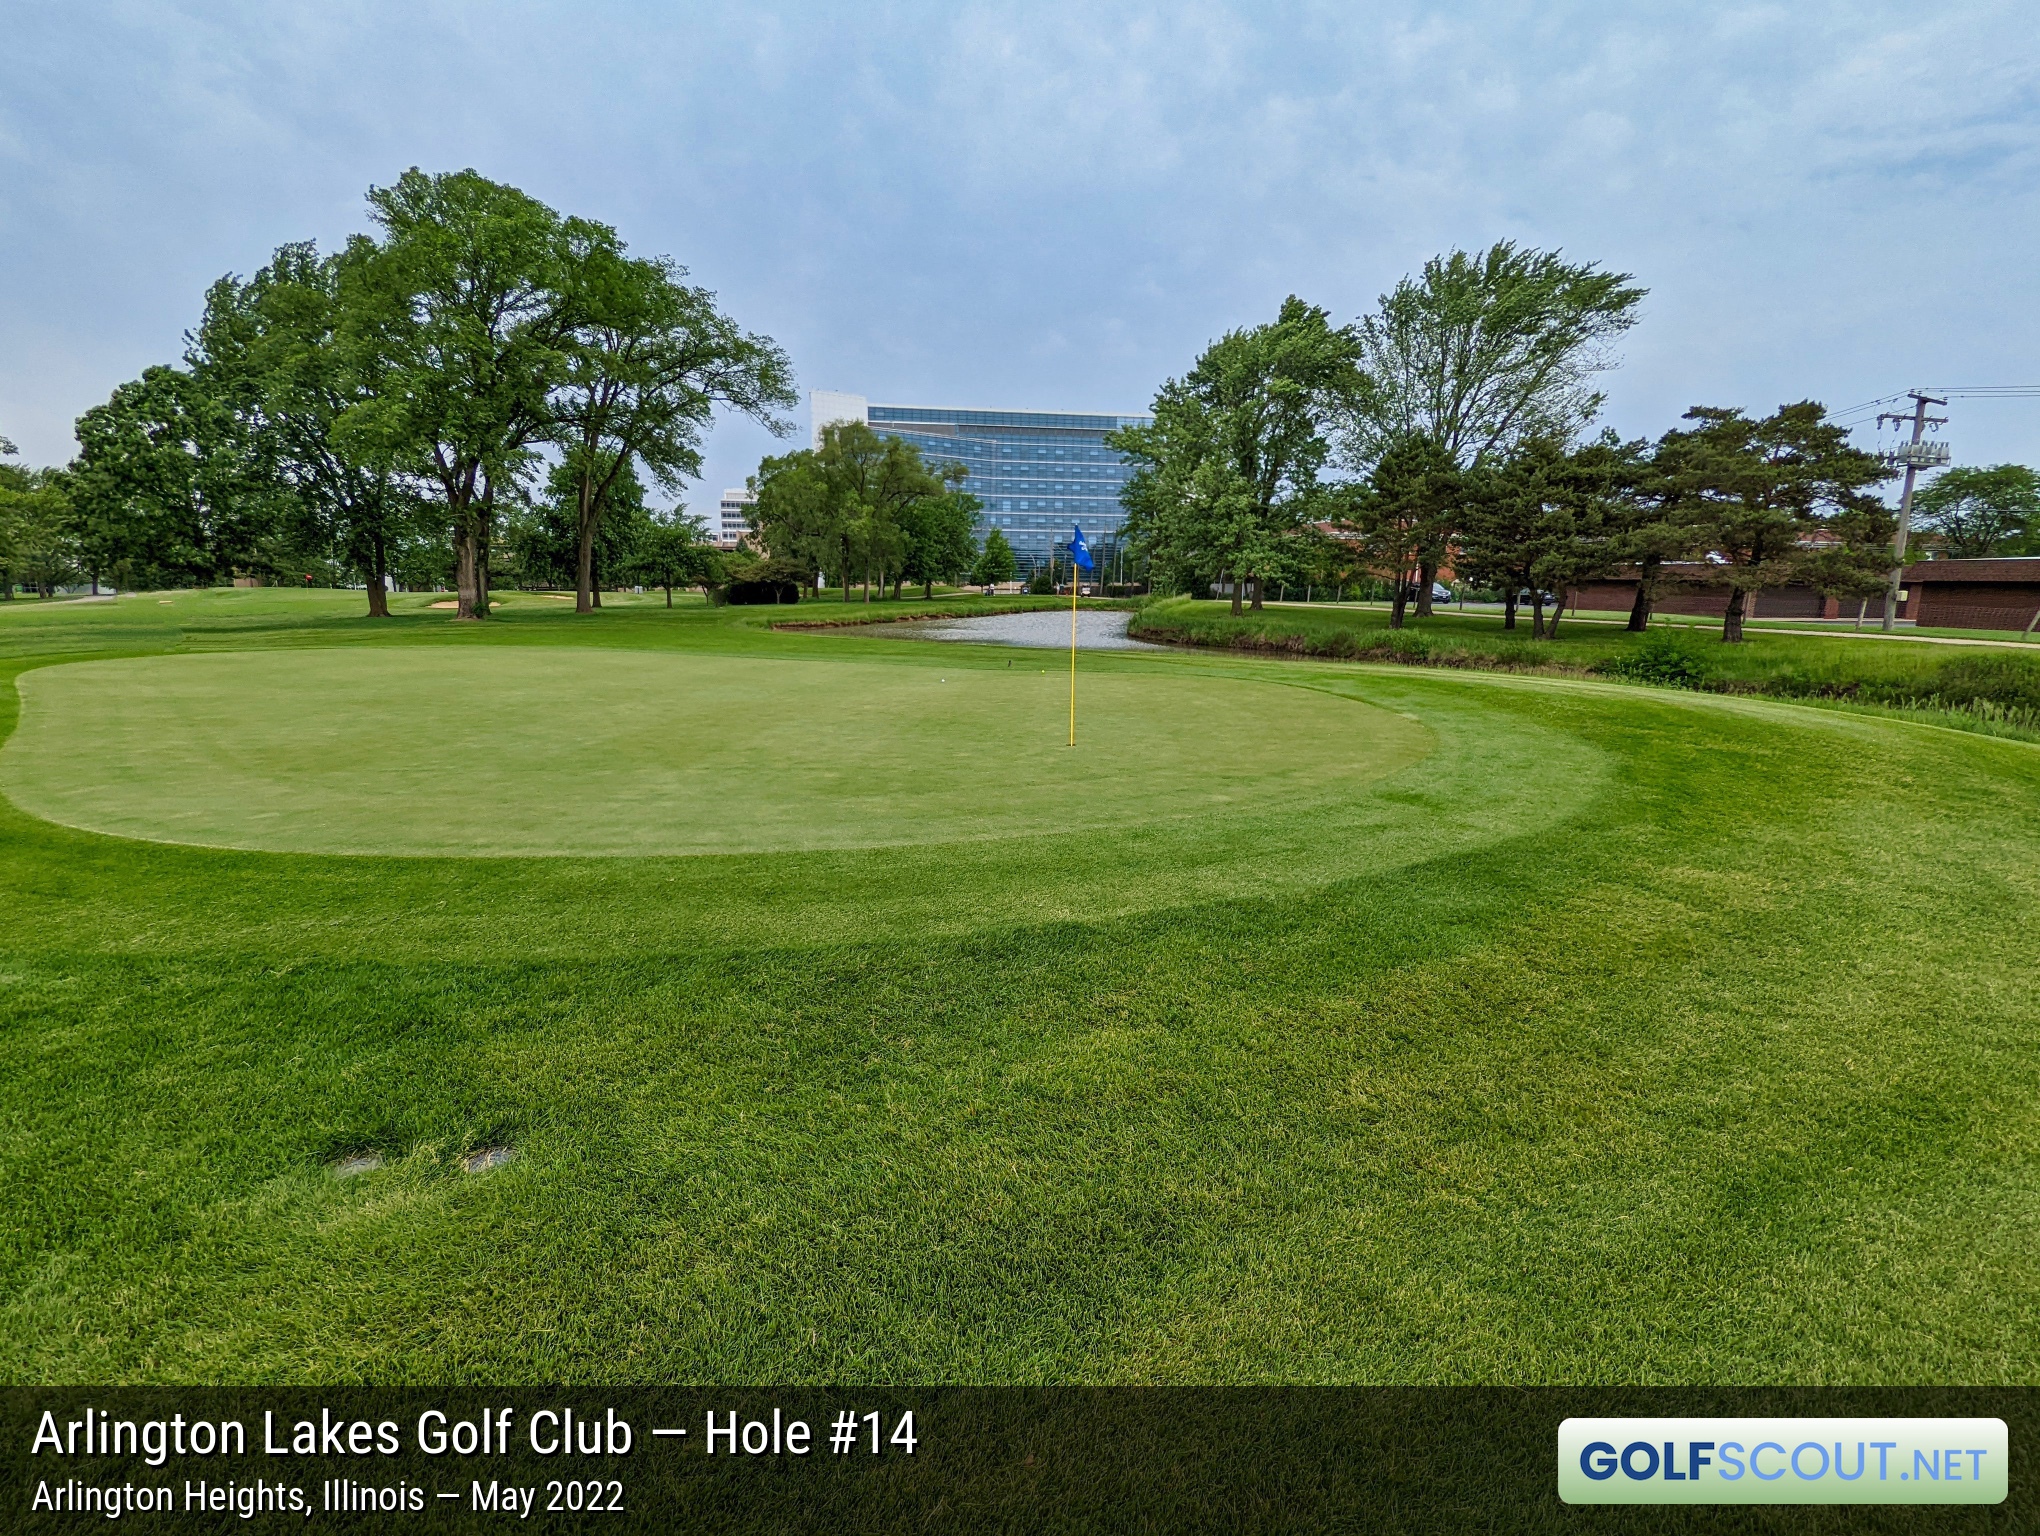 Photo of hole #14 at Arlington Lakes Golf Club in Arlington Heights, Illinois. View of the hole from the back of the green.